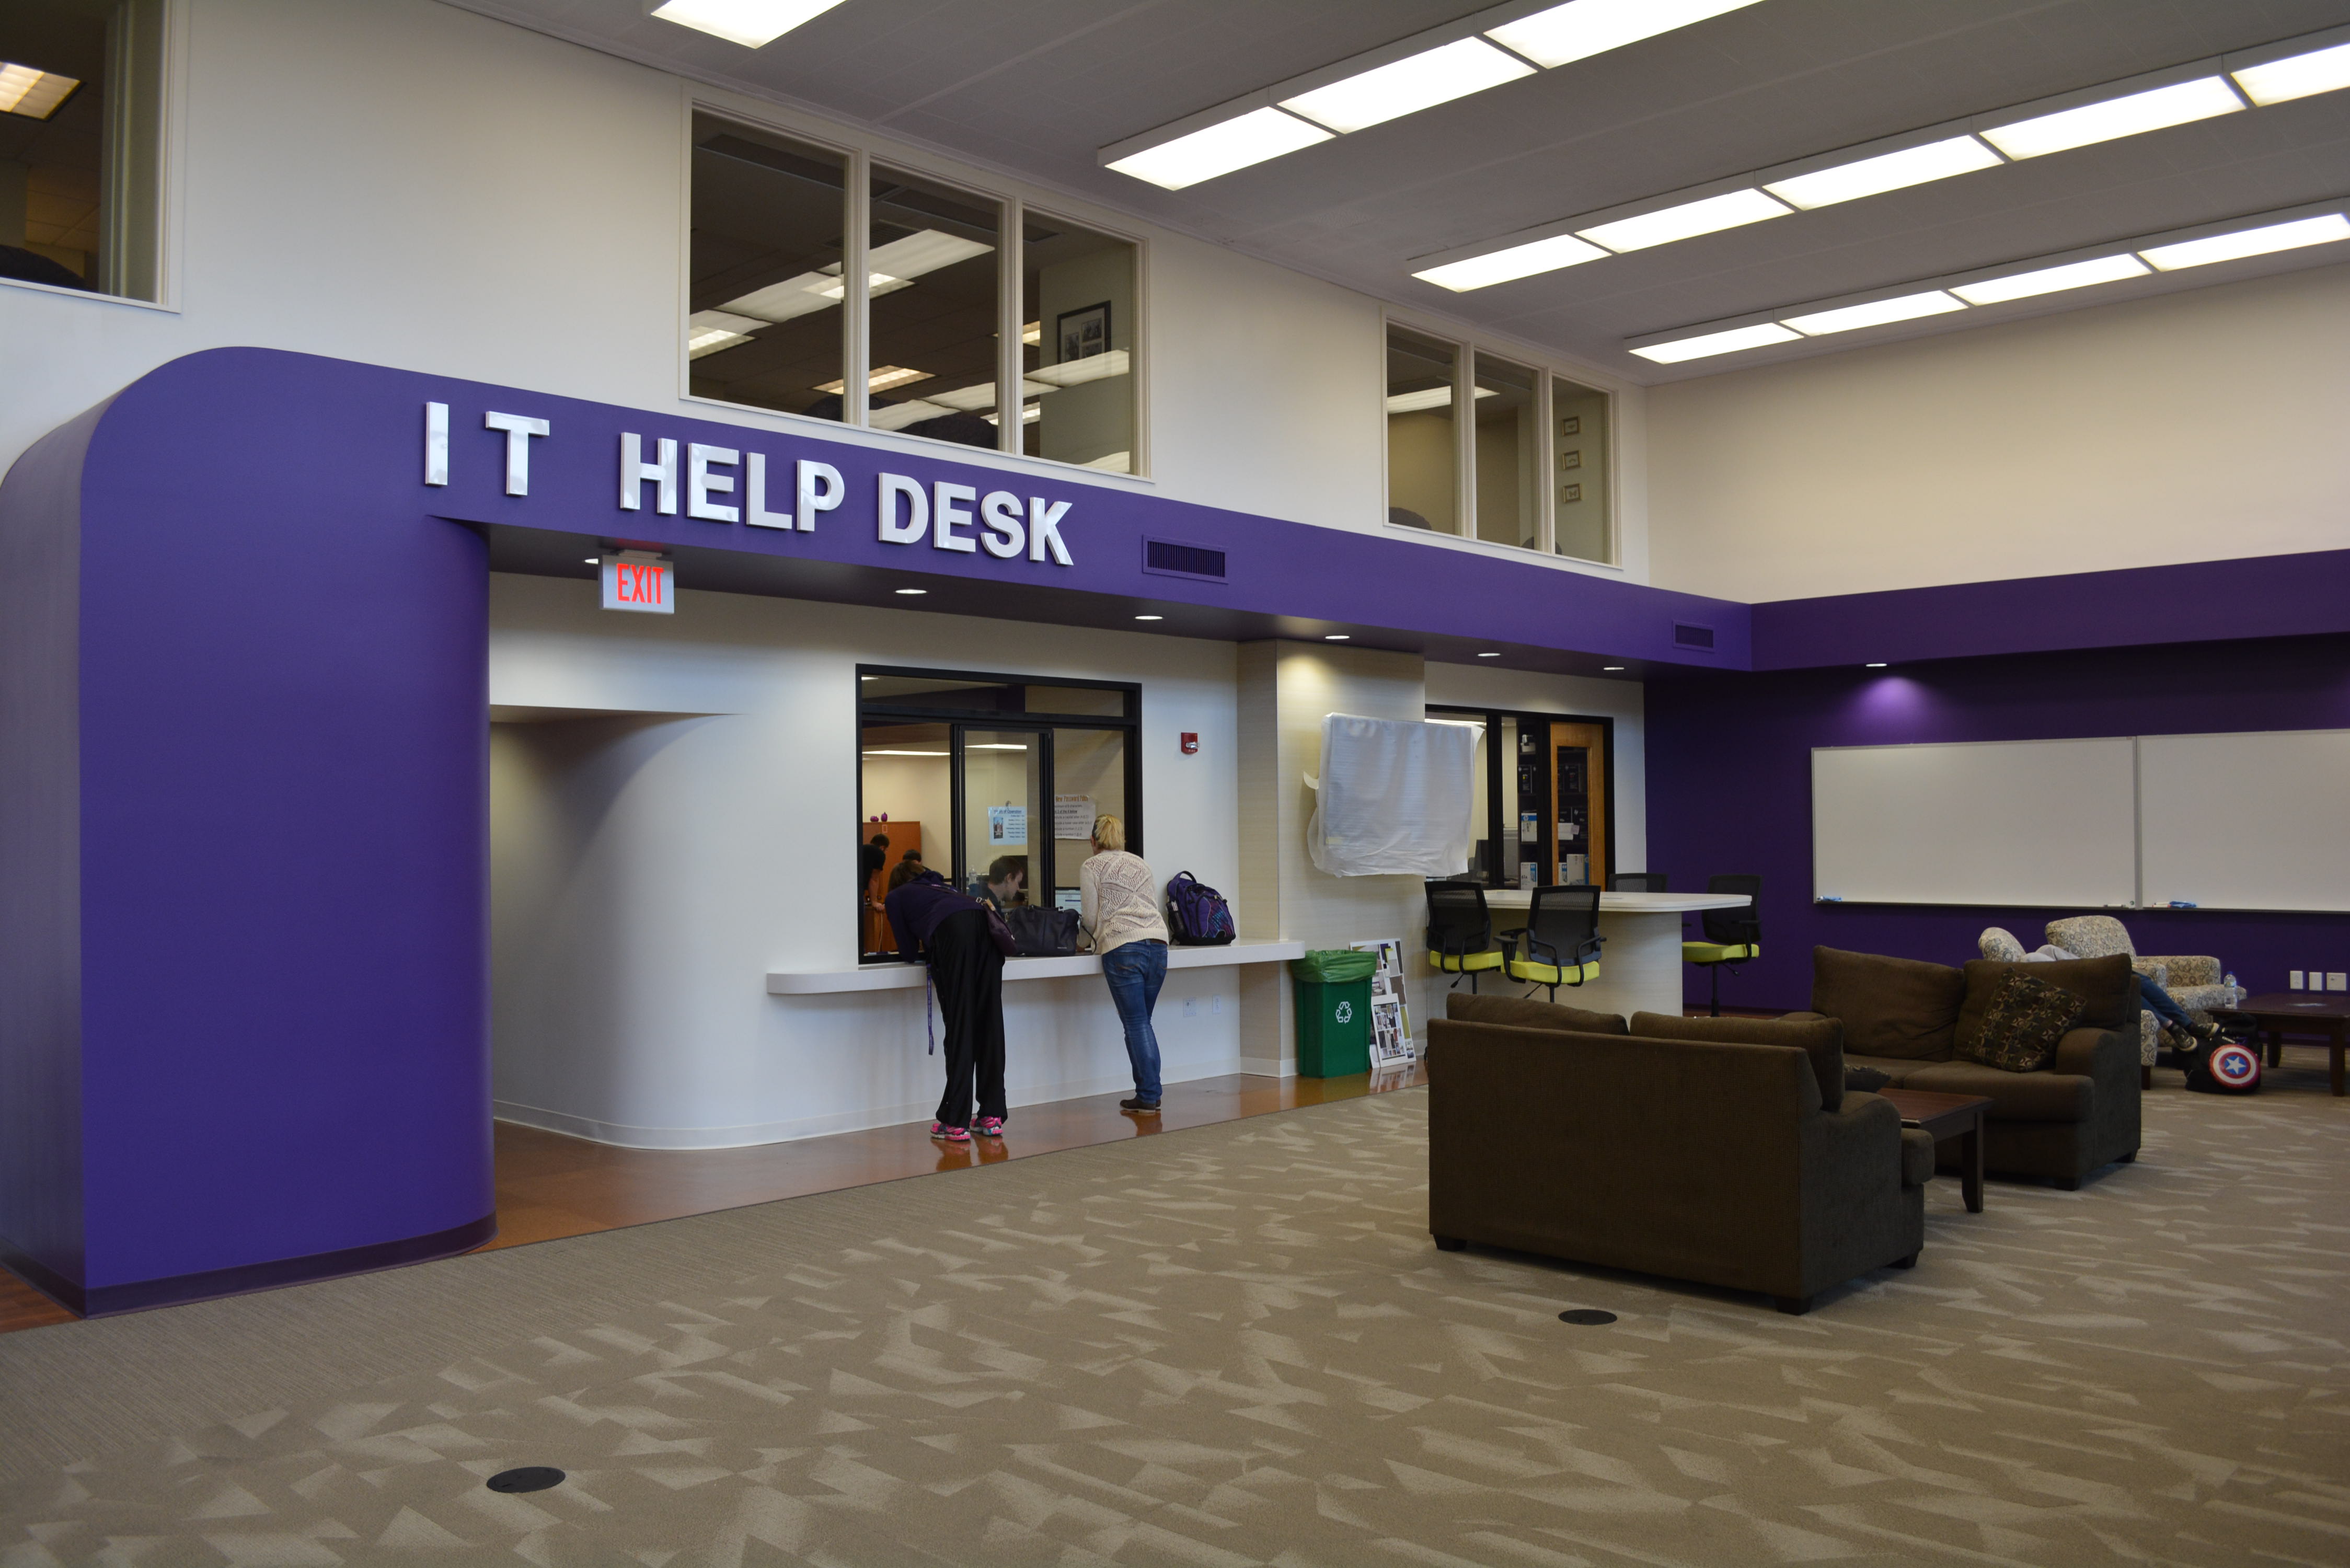 Students getting assistance from the IT HelpDesk at the University of Mount Union